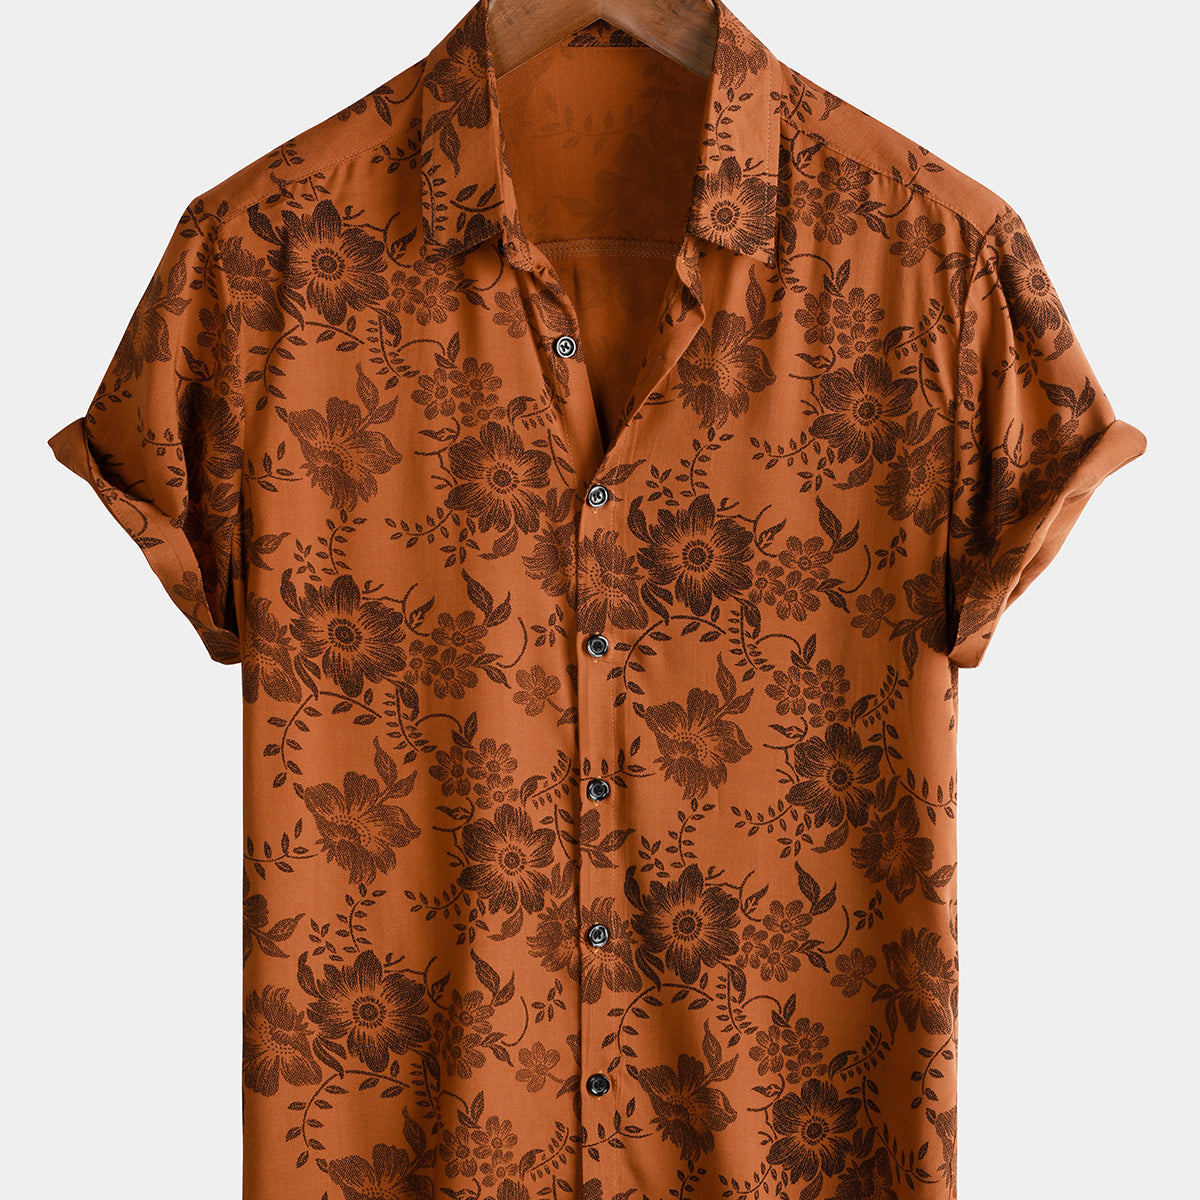 Men's Brown Floral Print Vintage Flower Holiday Breathable Short Sleeve Button Up Shirt